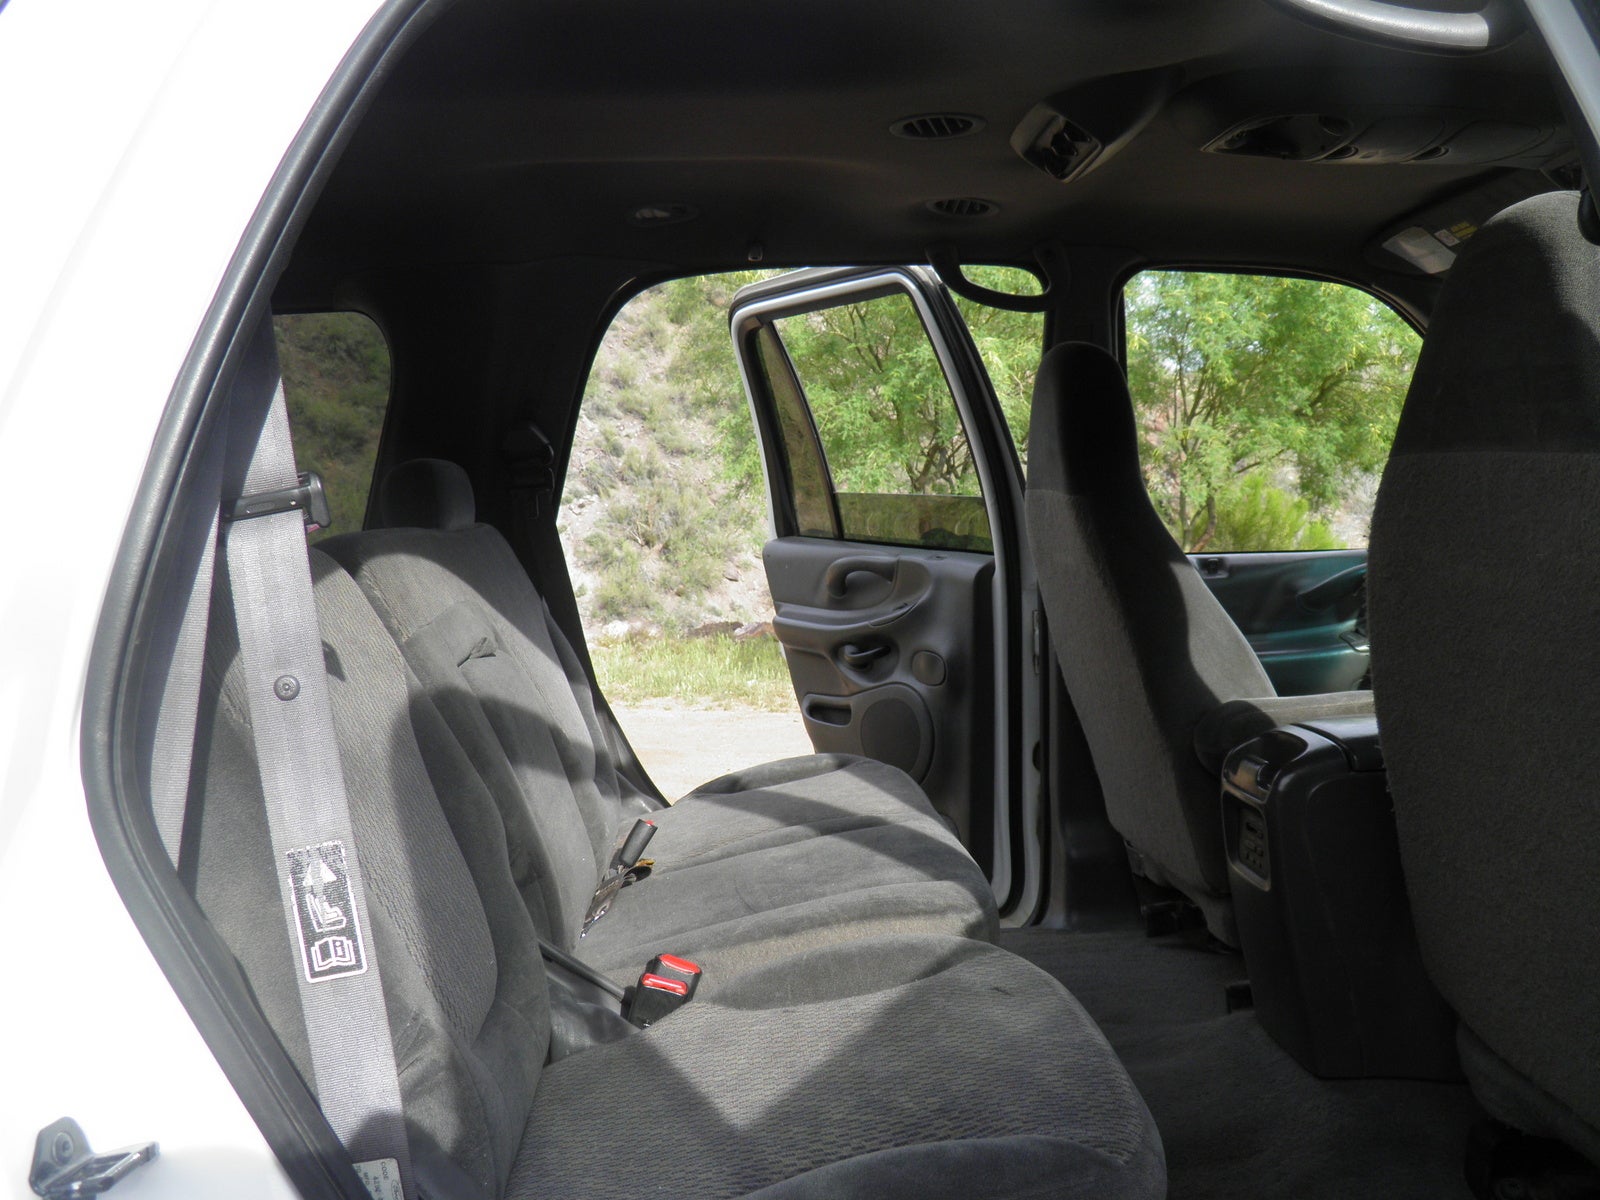 1999 Ford expedition interior #5